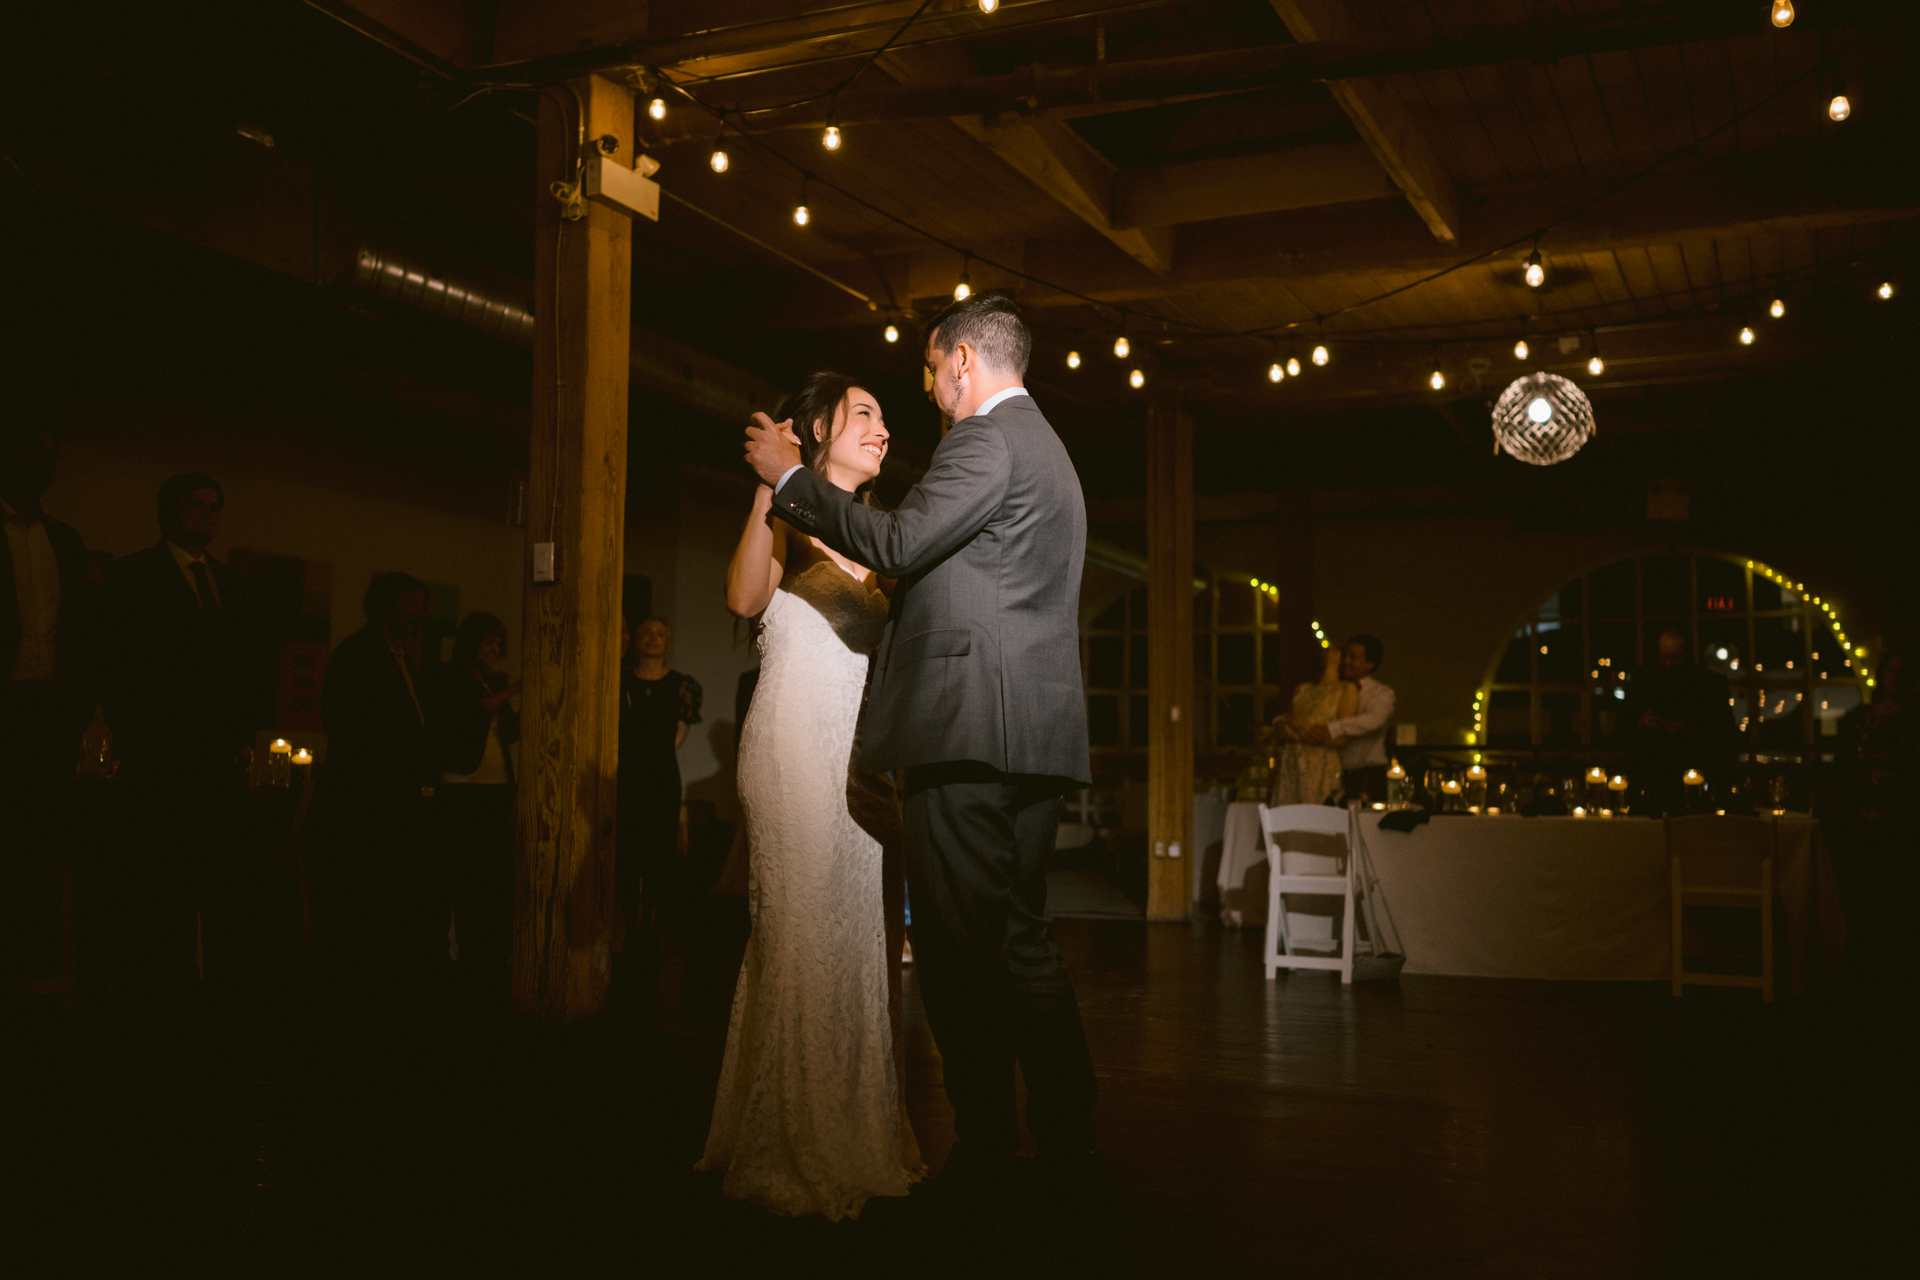 The newlyweds performed their first dance at Twist Gallery.